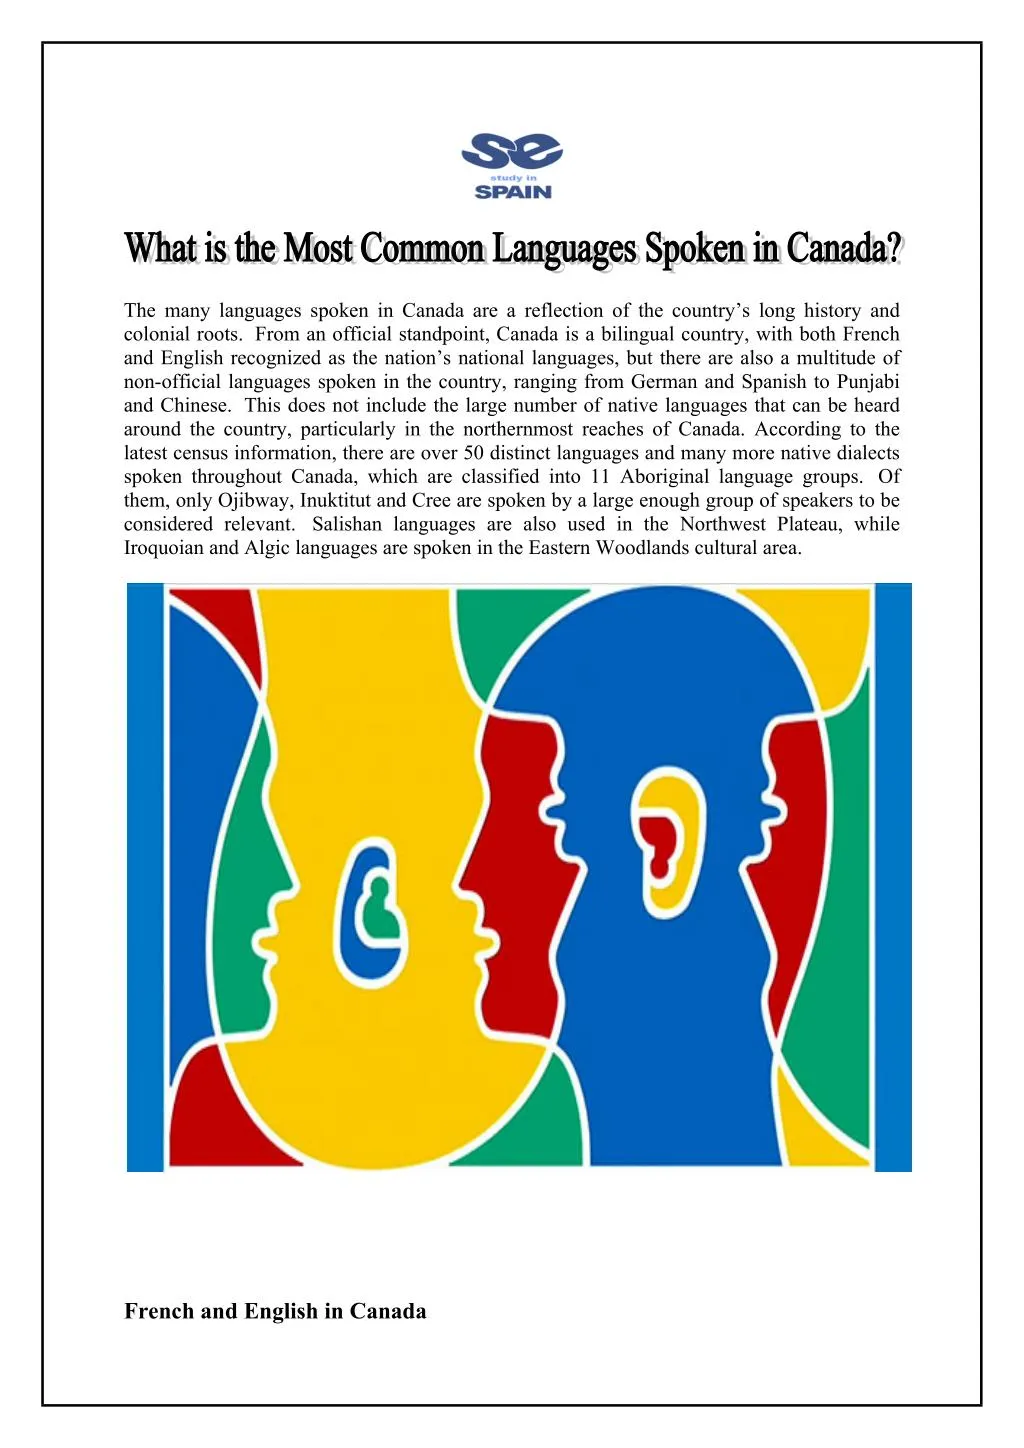 the many languages spoken in canada